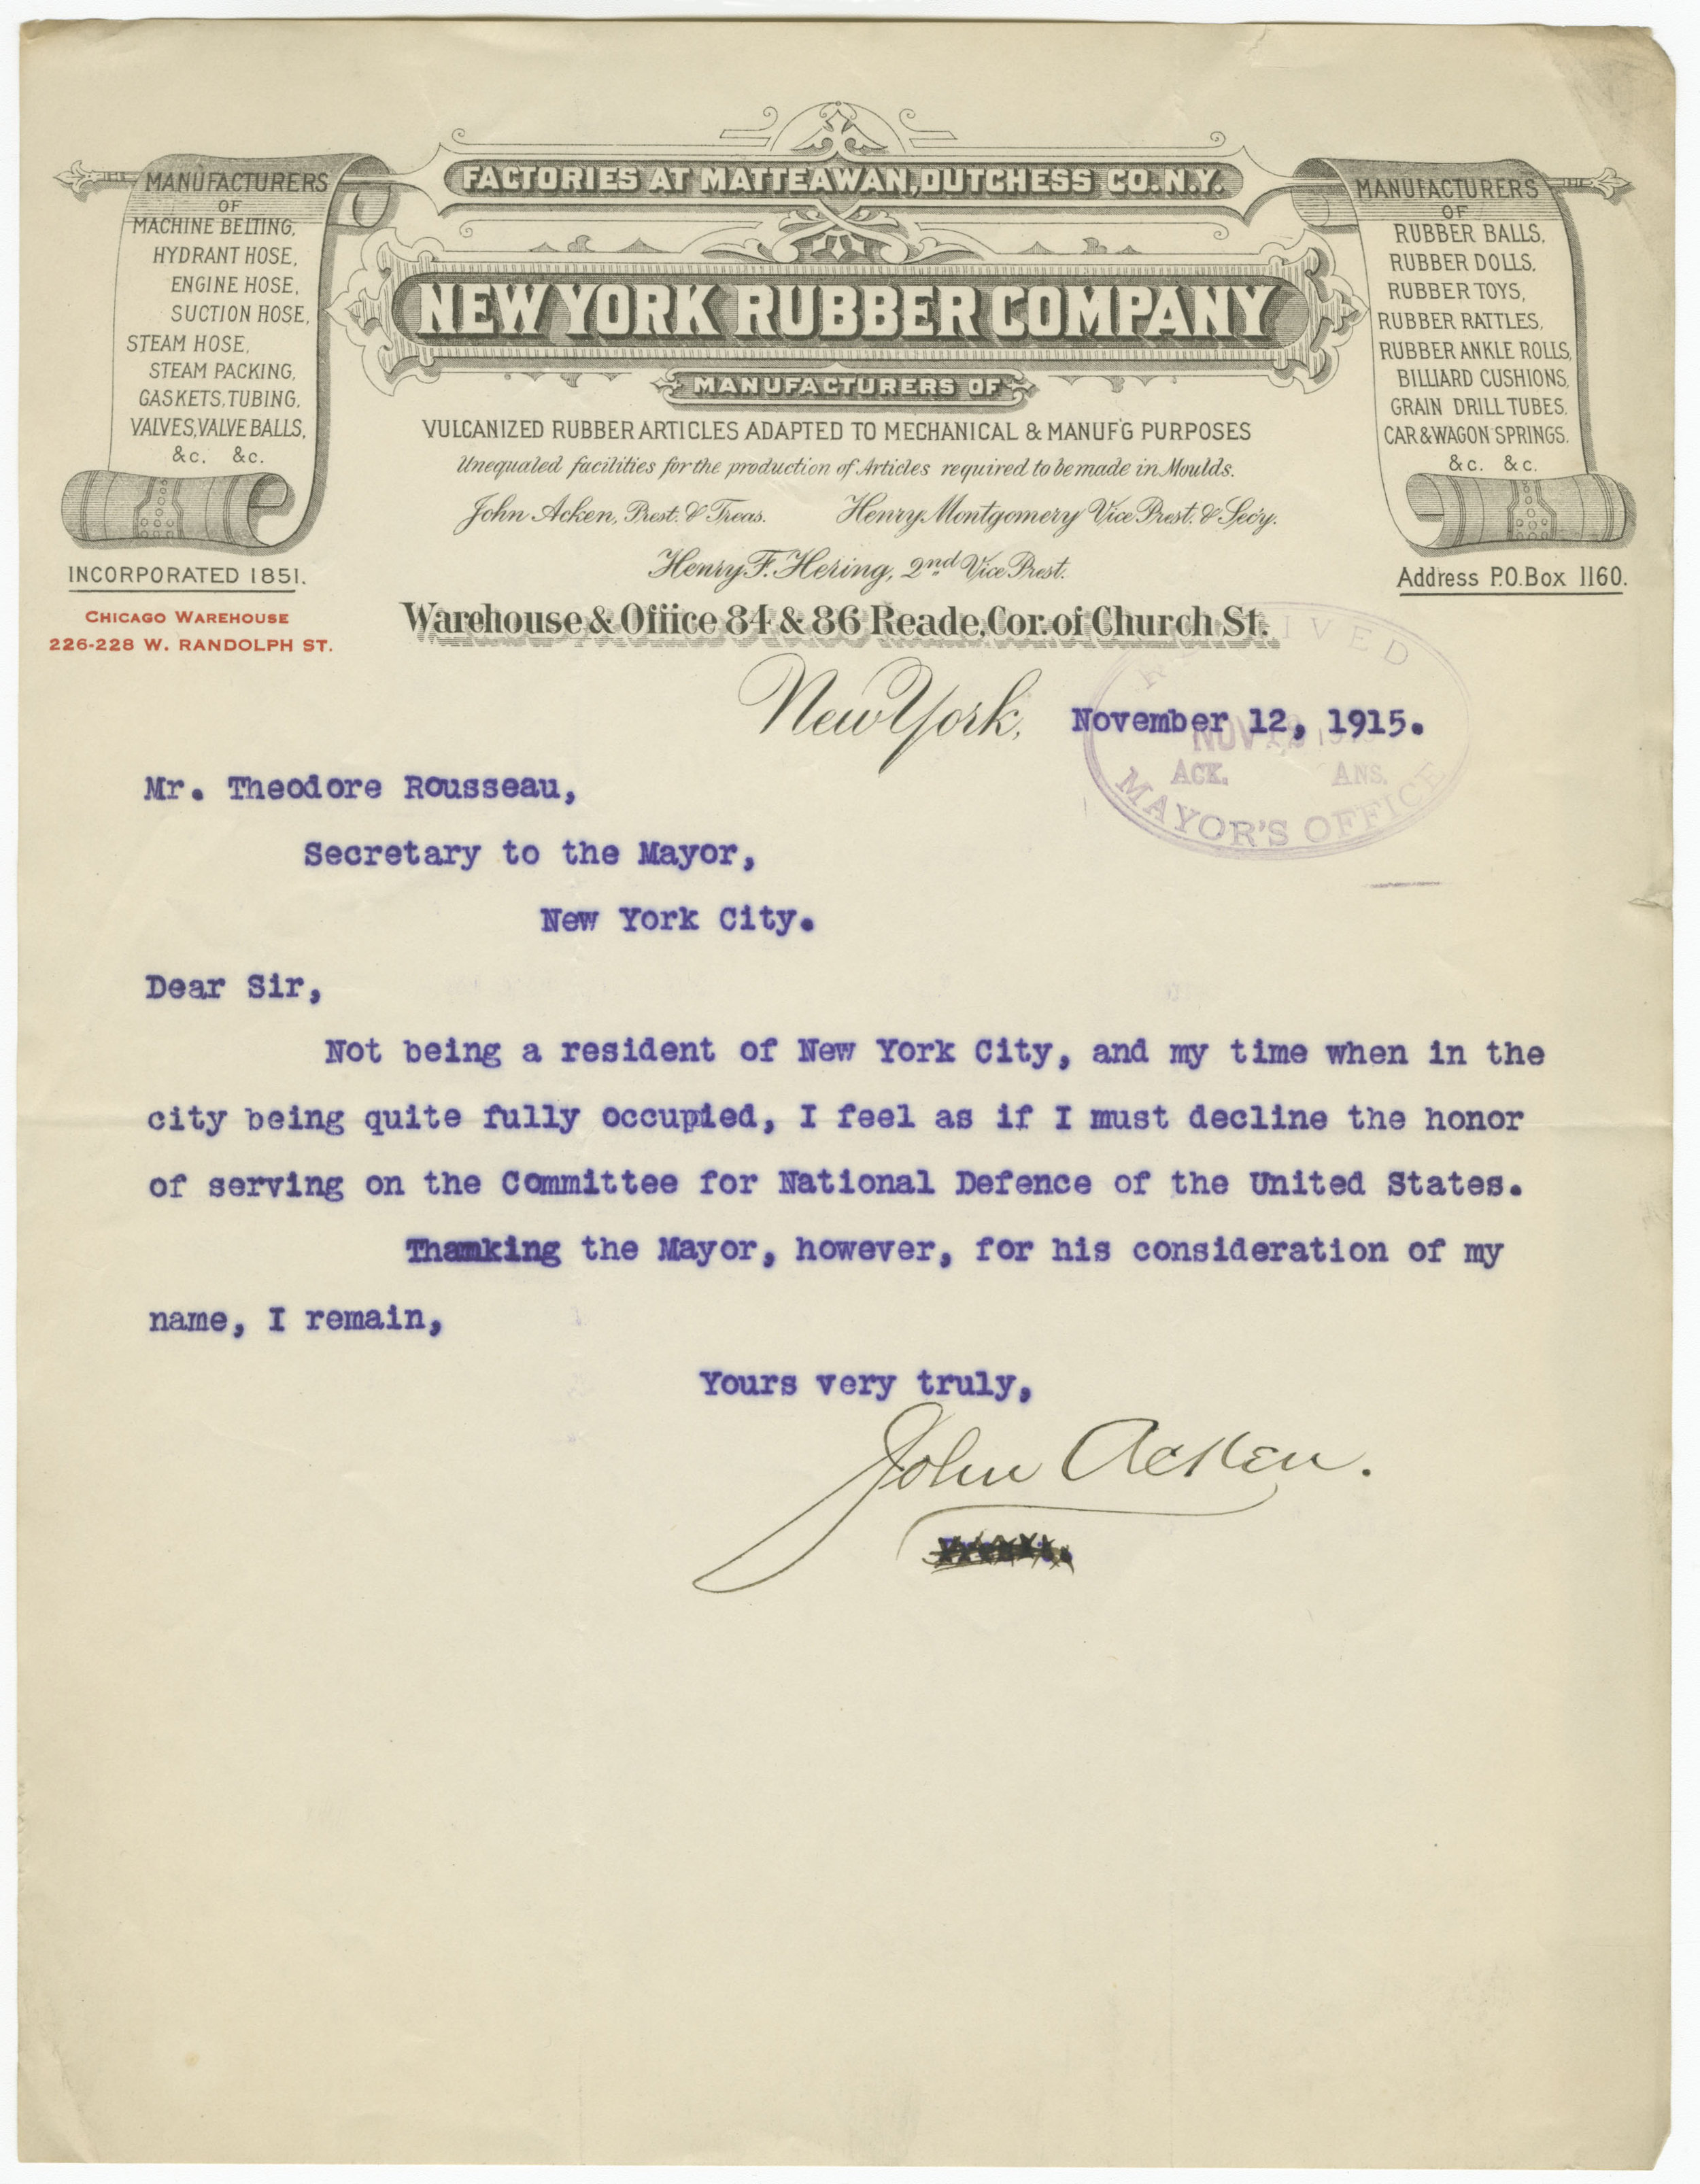 Fun with Letterheads — NYC Department of Records and Information Services pic